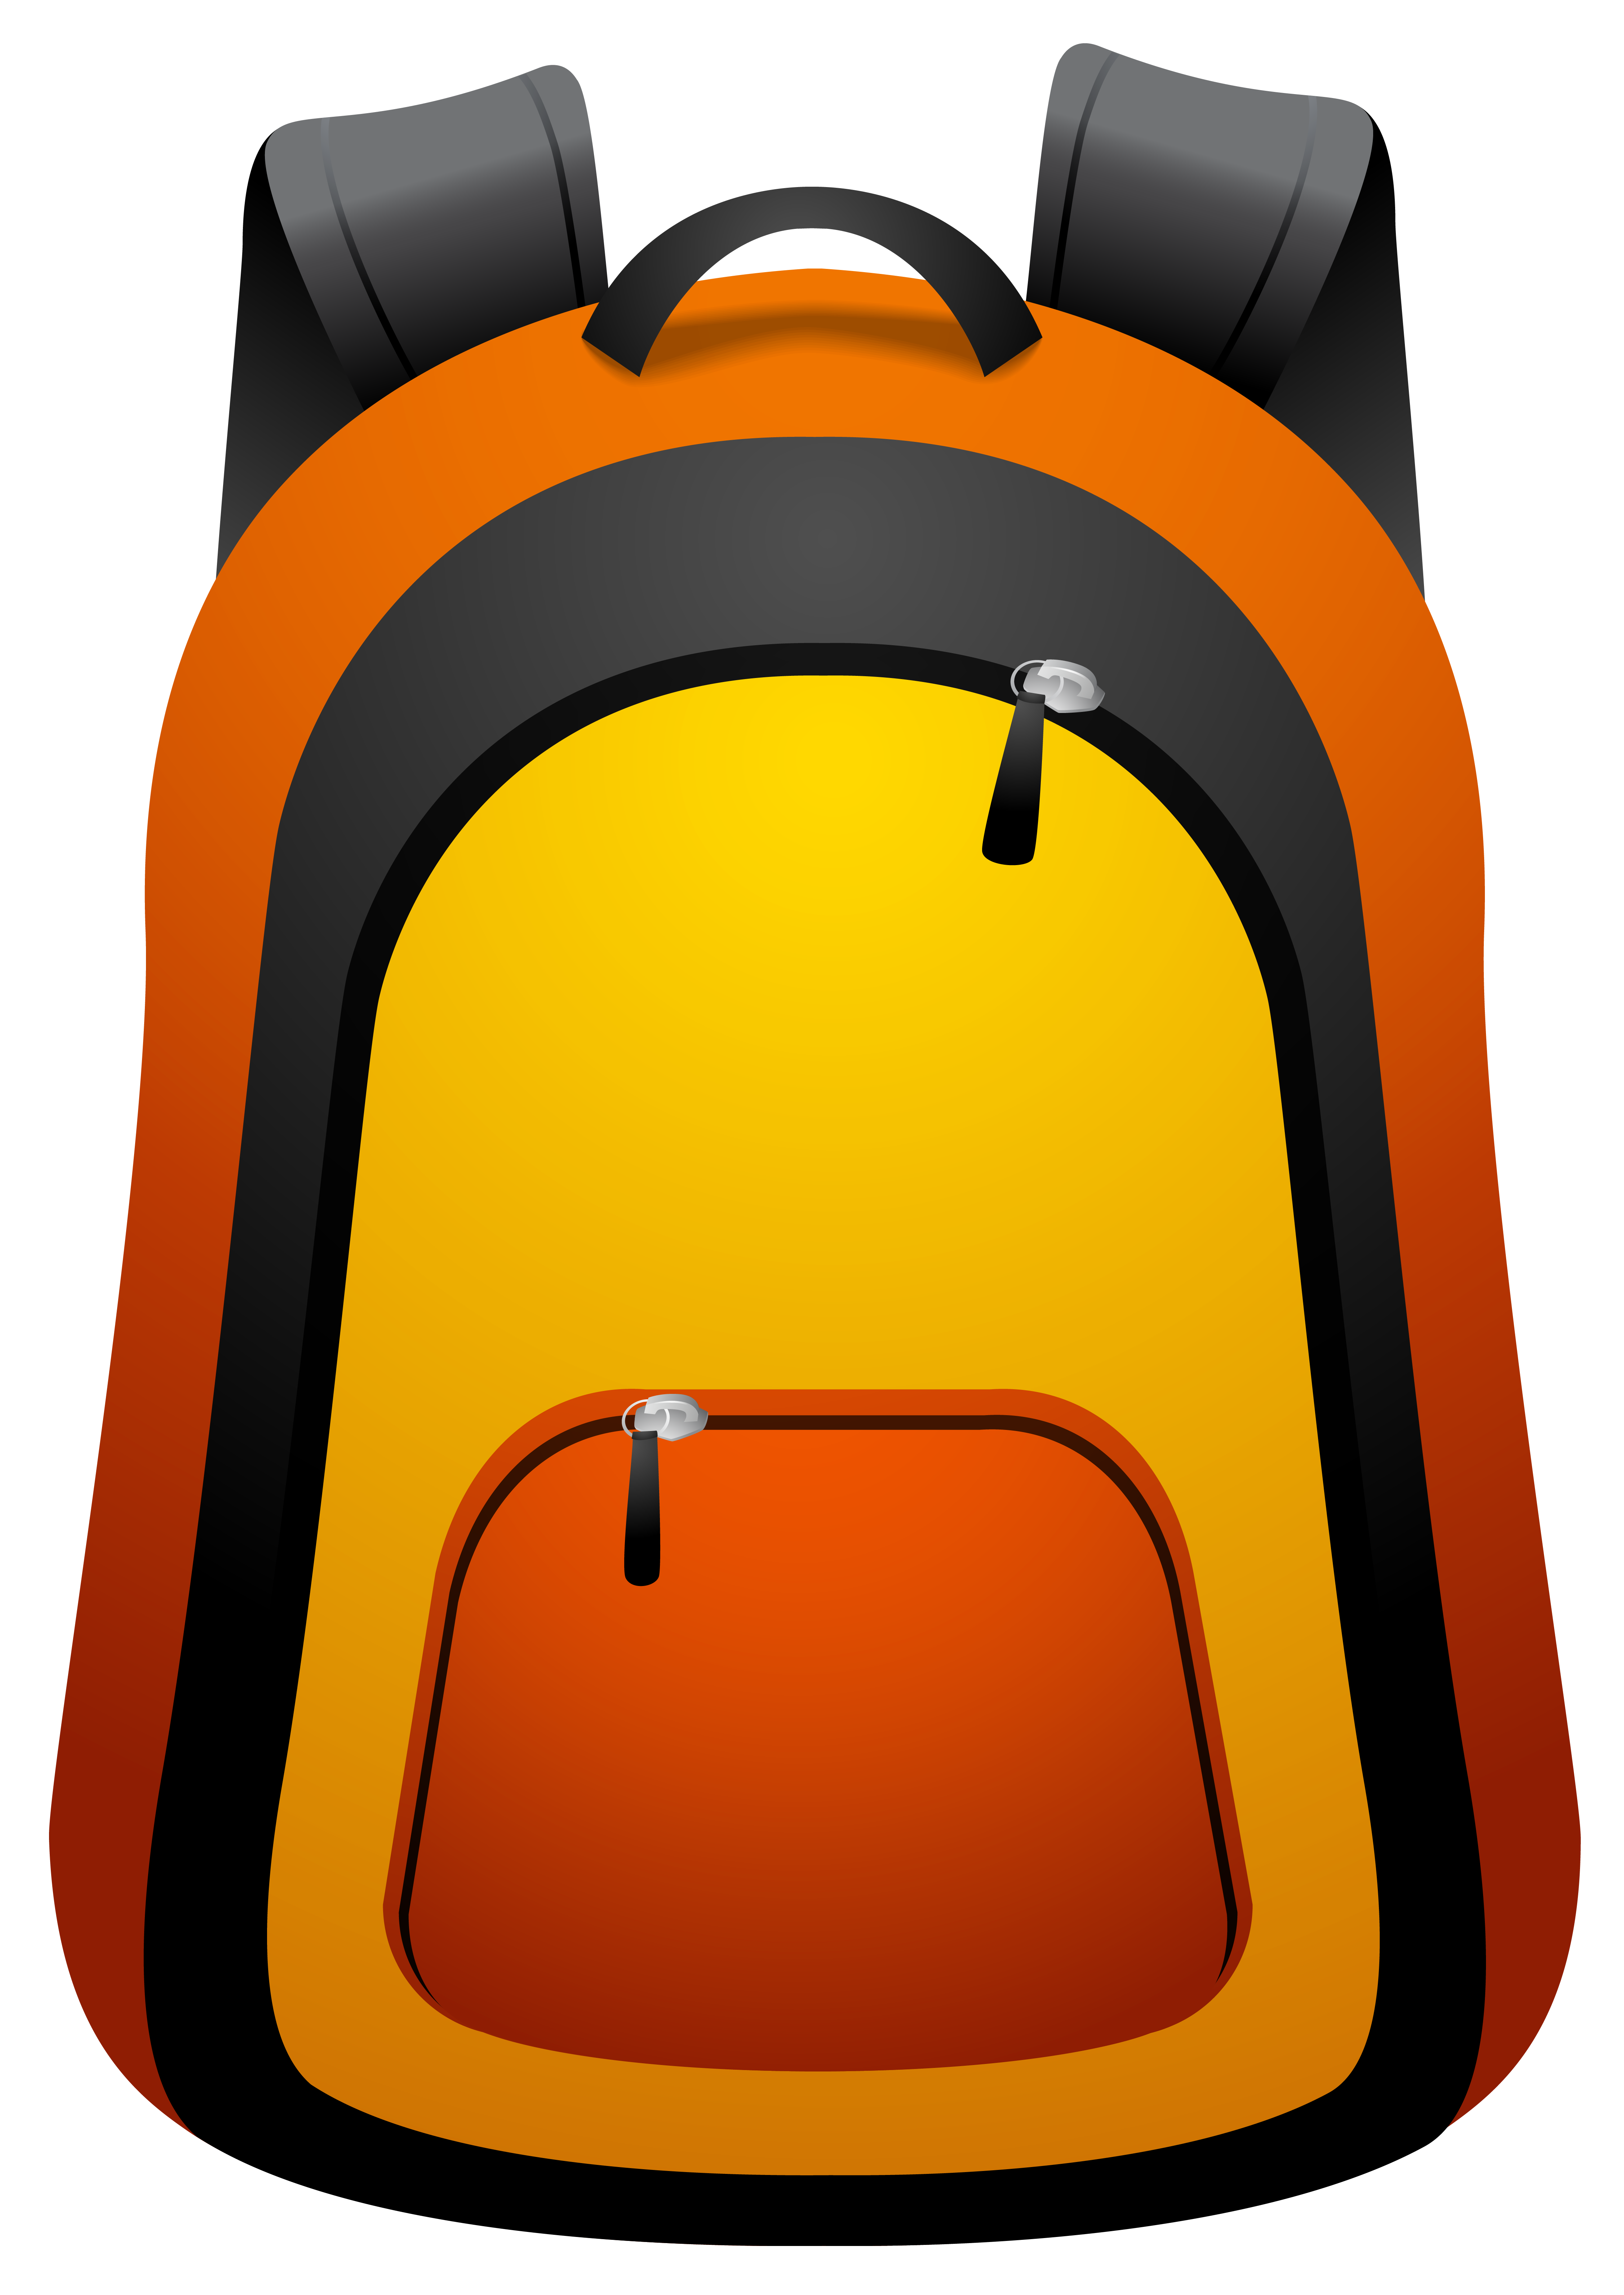 Backpack clipart. Free download transparent .PNG